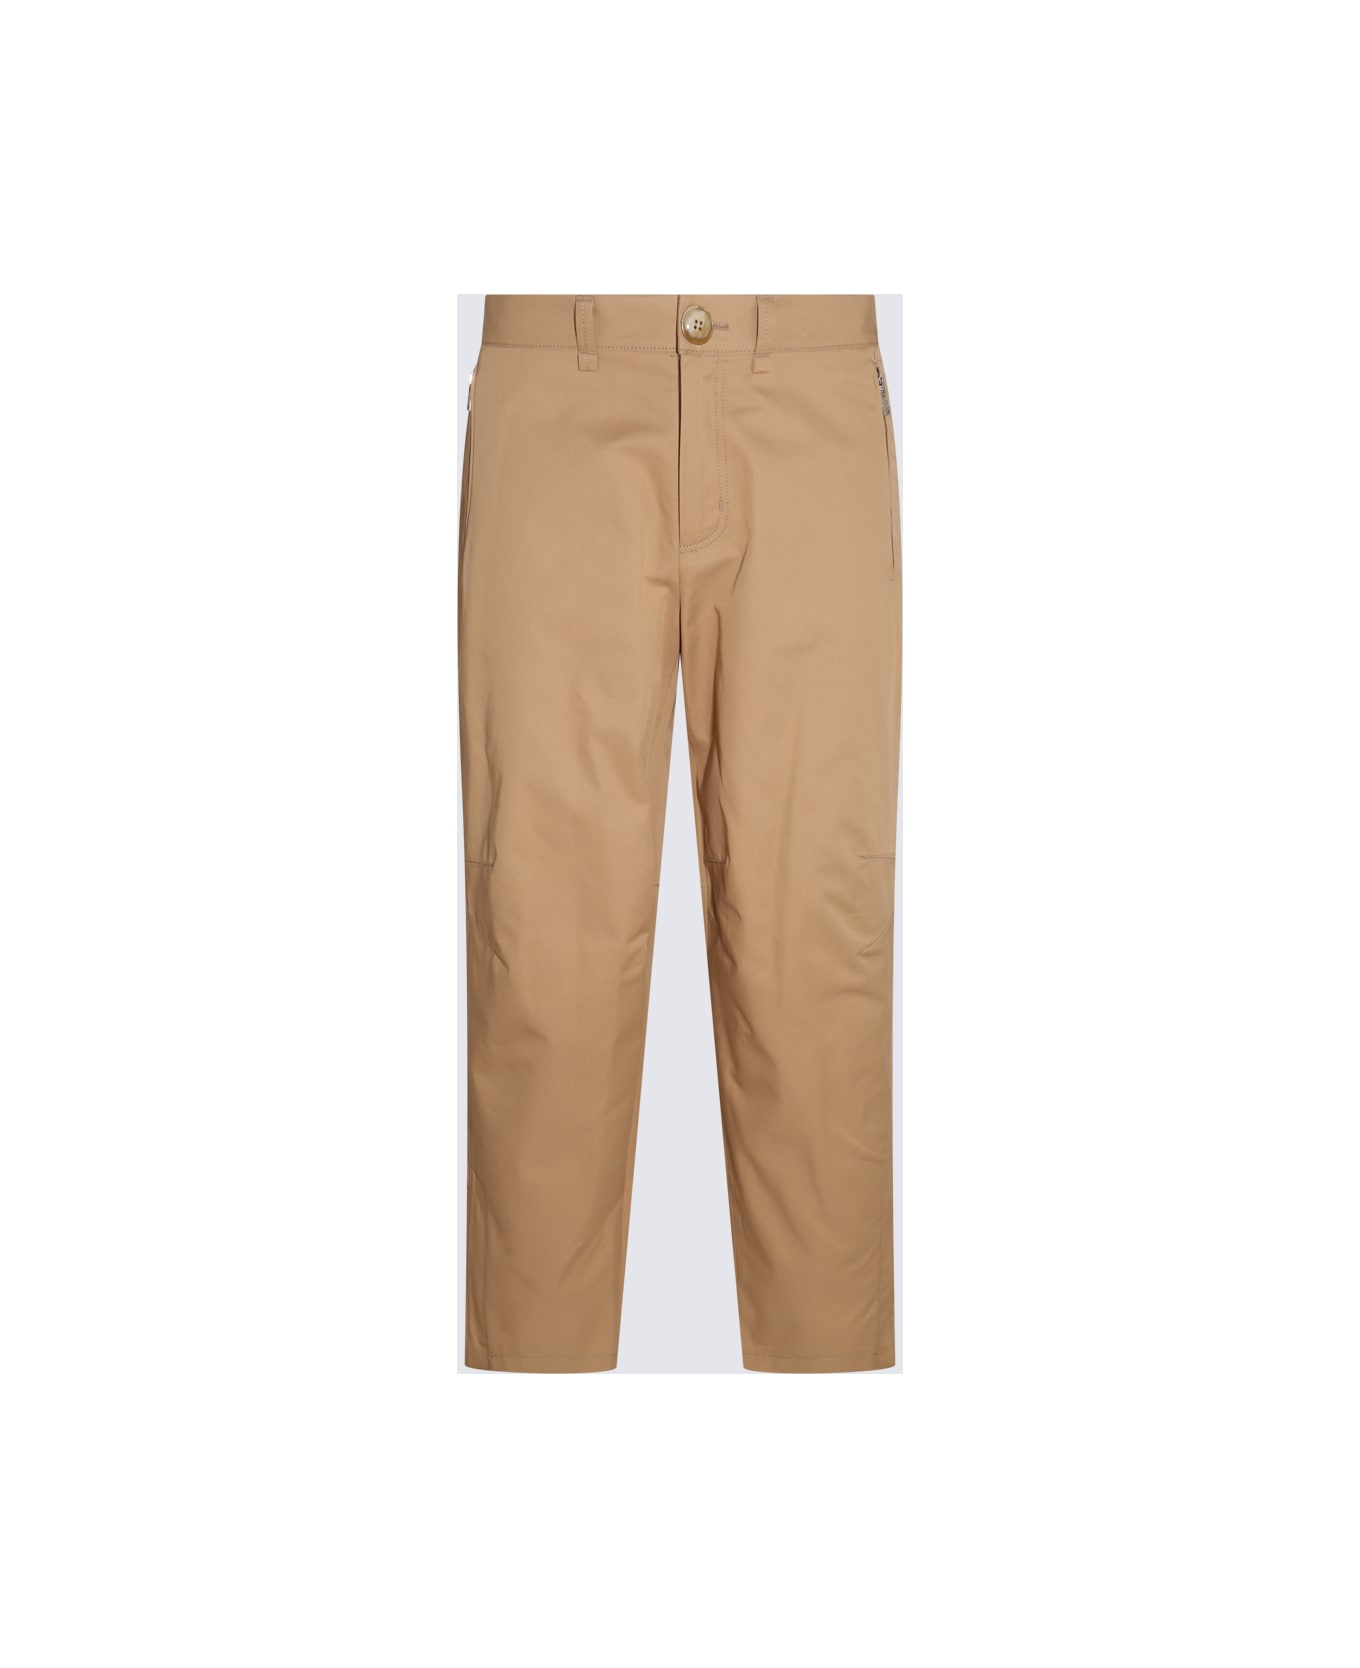 Lanvin Sand Cotton And Wool Blend Pants - SAND